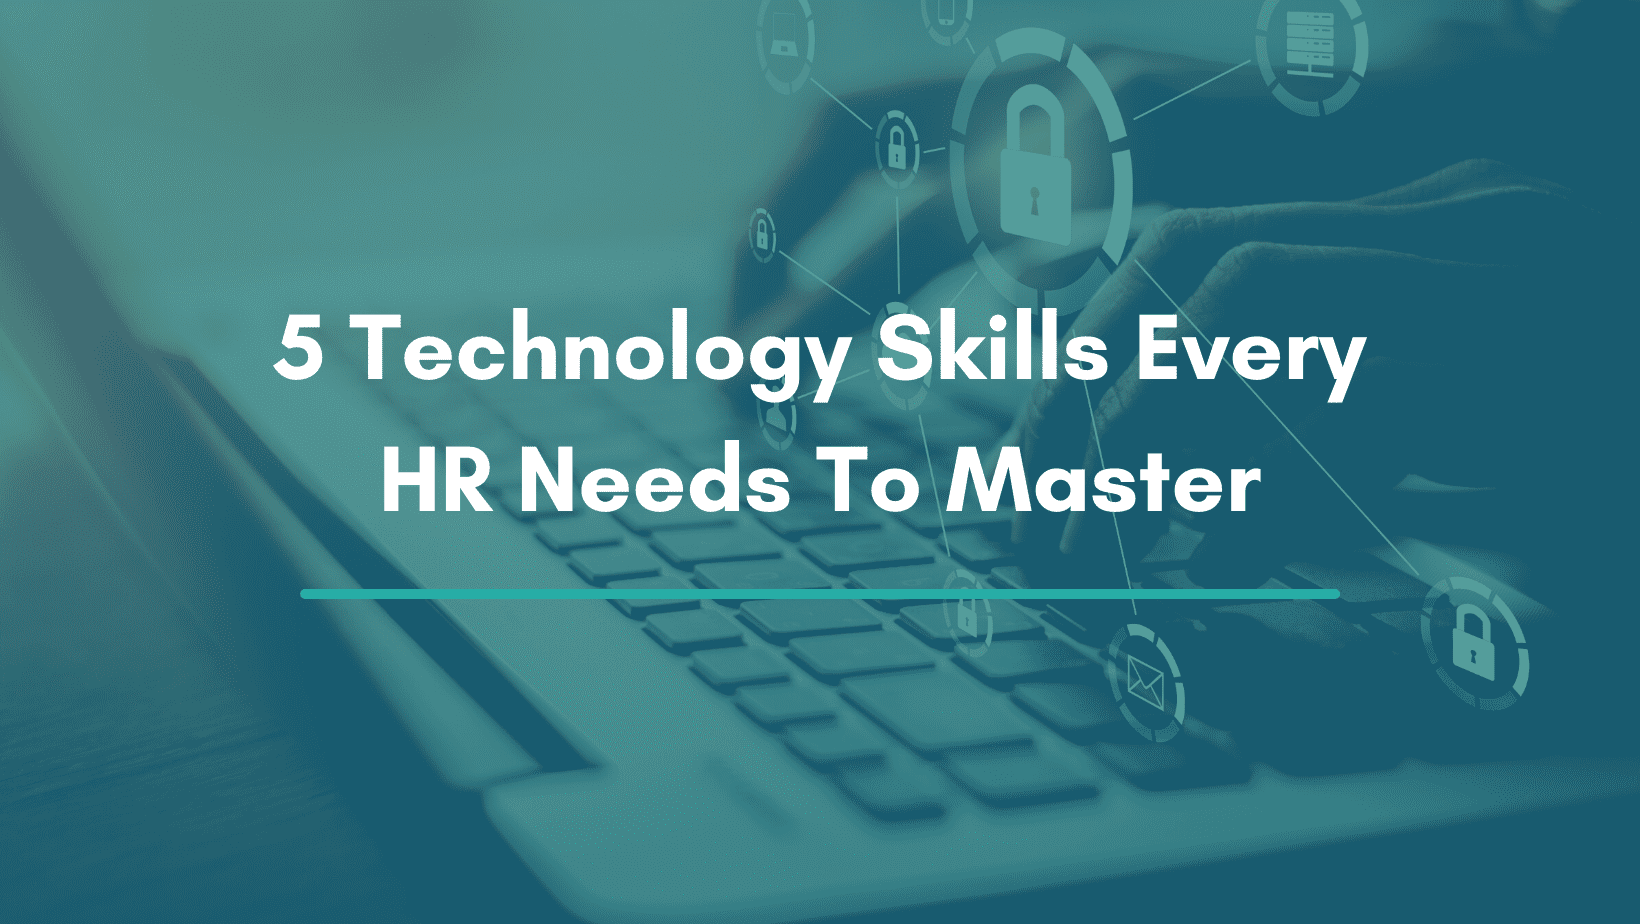 5 technology skills that every HR needs to master. 5 essential technology skills for HR. 5 must have skills for HR professionals. What are some of the best technology skills every HR needs to learn. Technology skills every HR need to learn. Essential skills for HR professionals